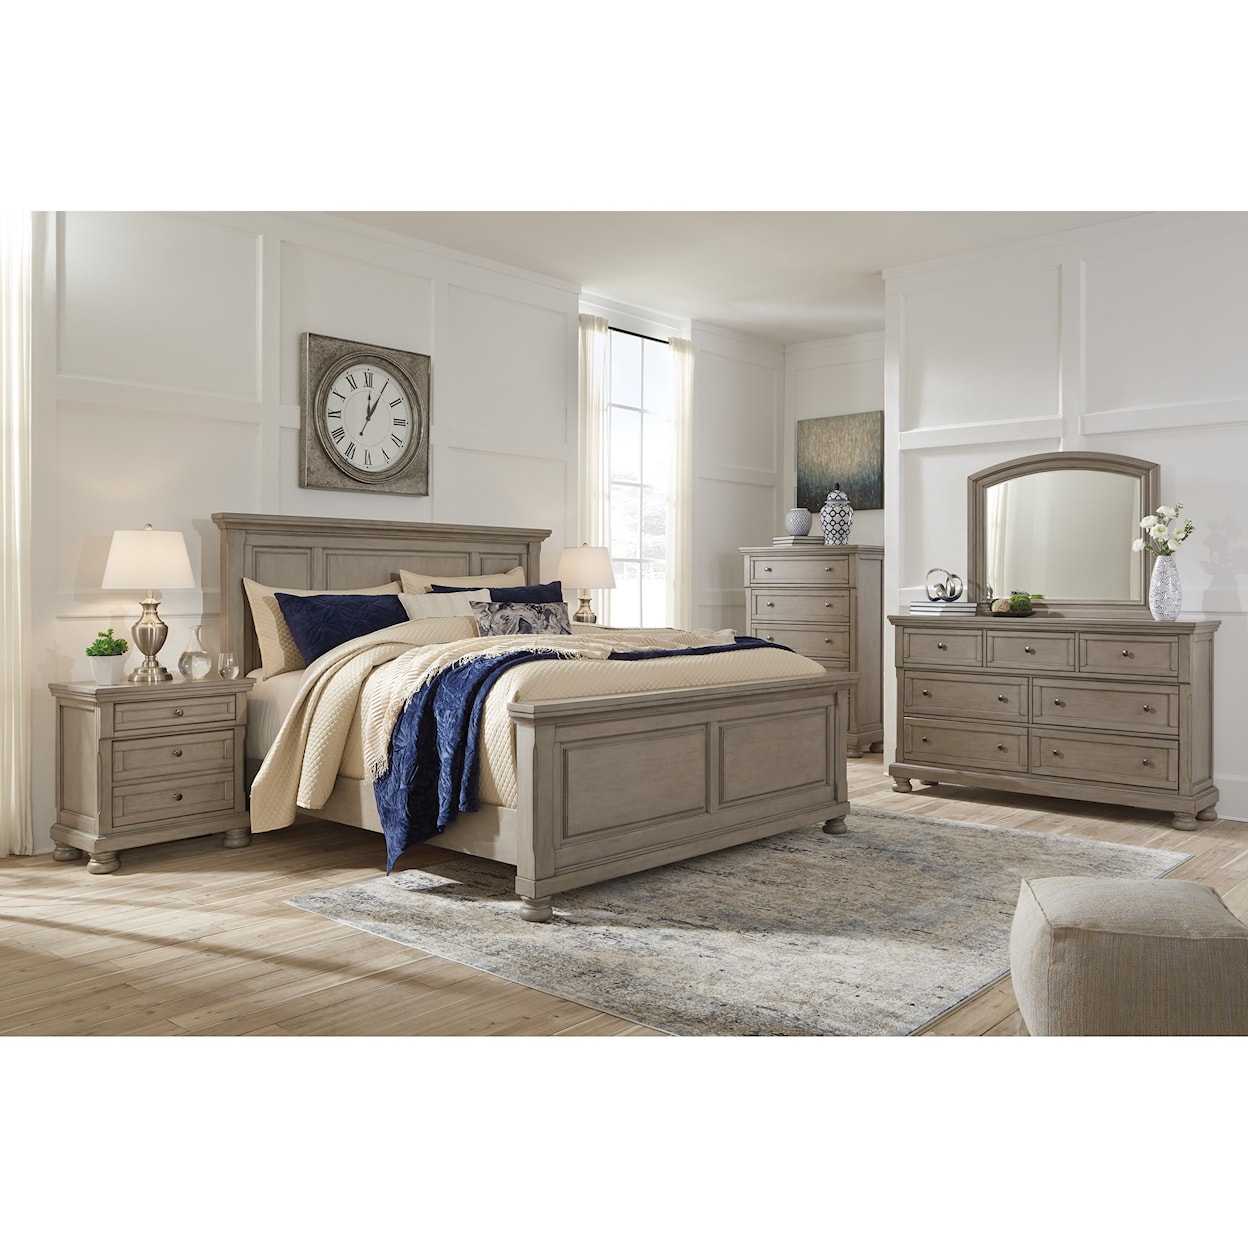 Signature Design by Ashley Lettner California King Bedroom Group